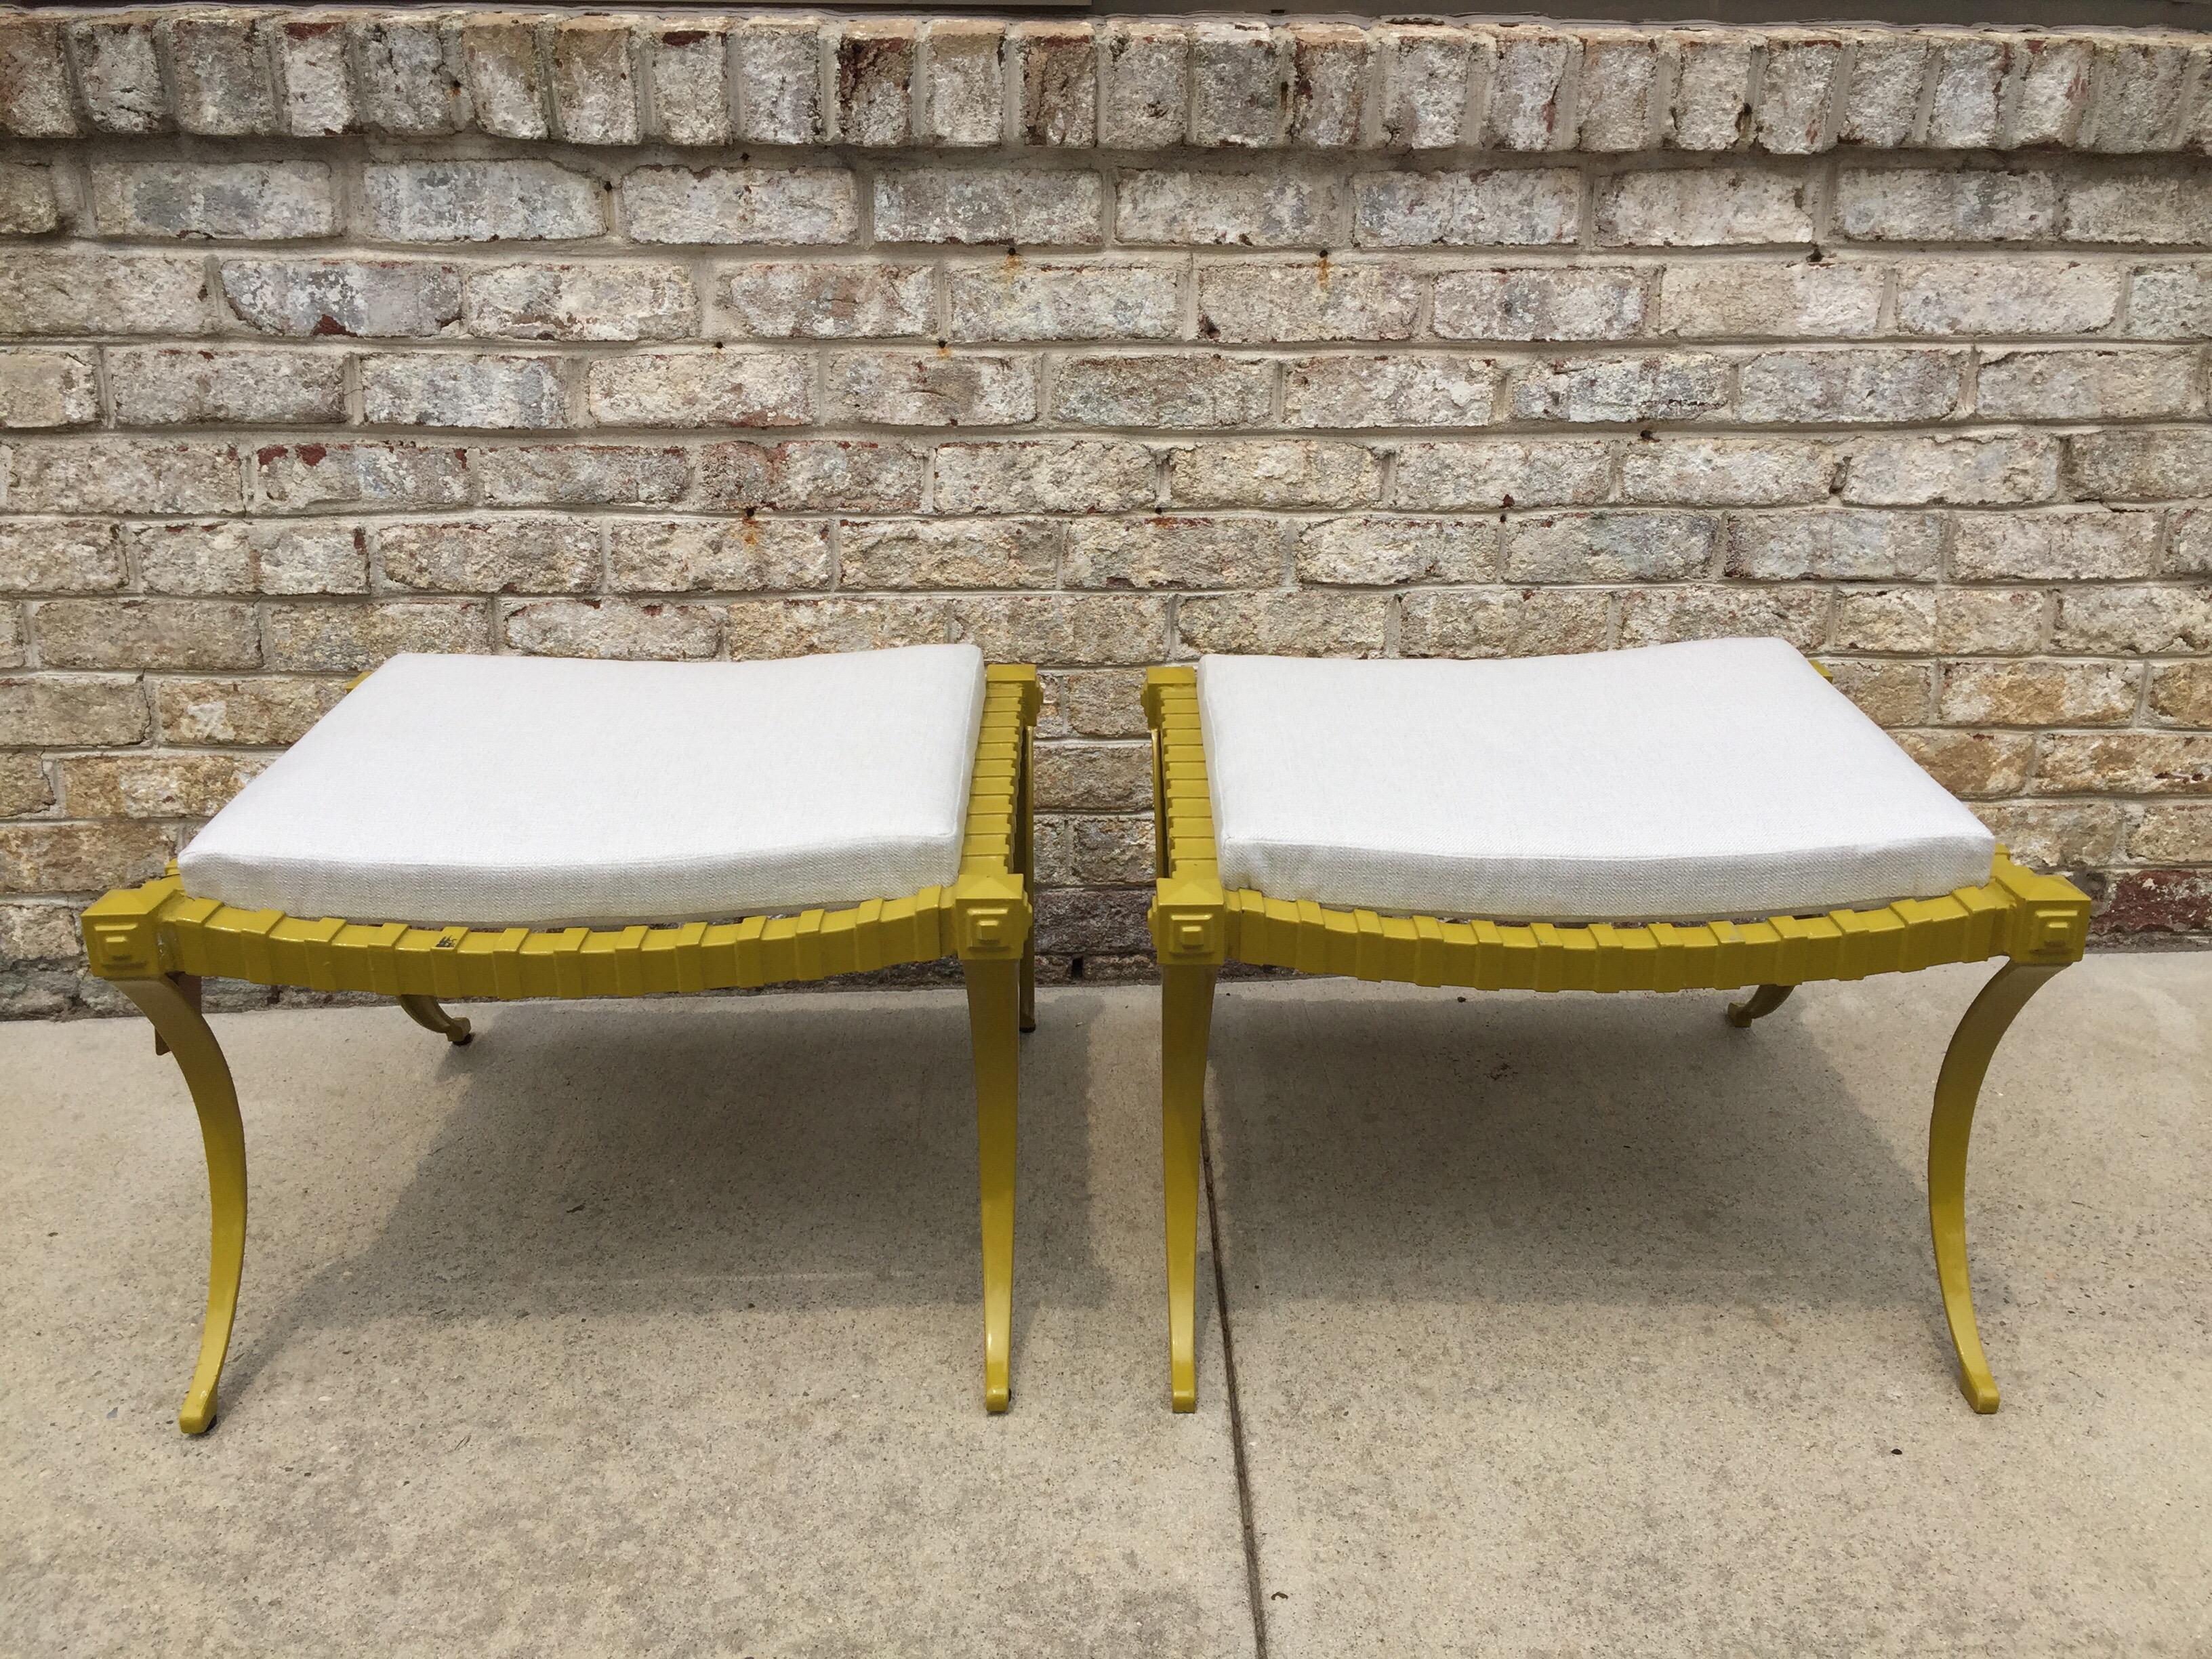 Set of 2 klismos style ottomans/ benches in aluminum by Thinline. Powder-coated in chartreuse color, with custom heavy woven linen cushion.